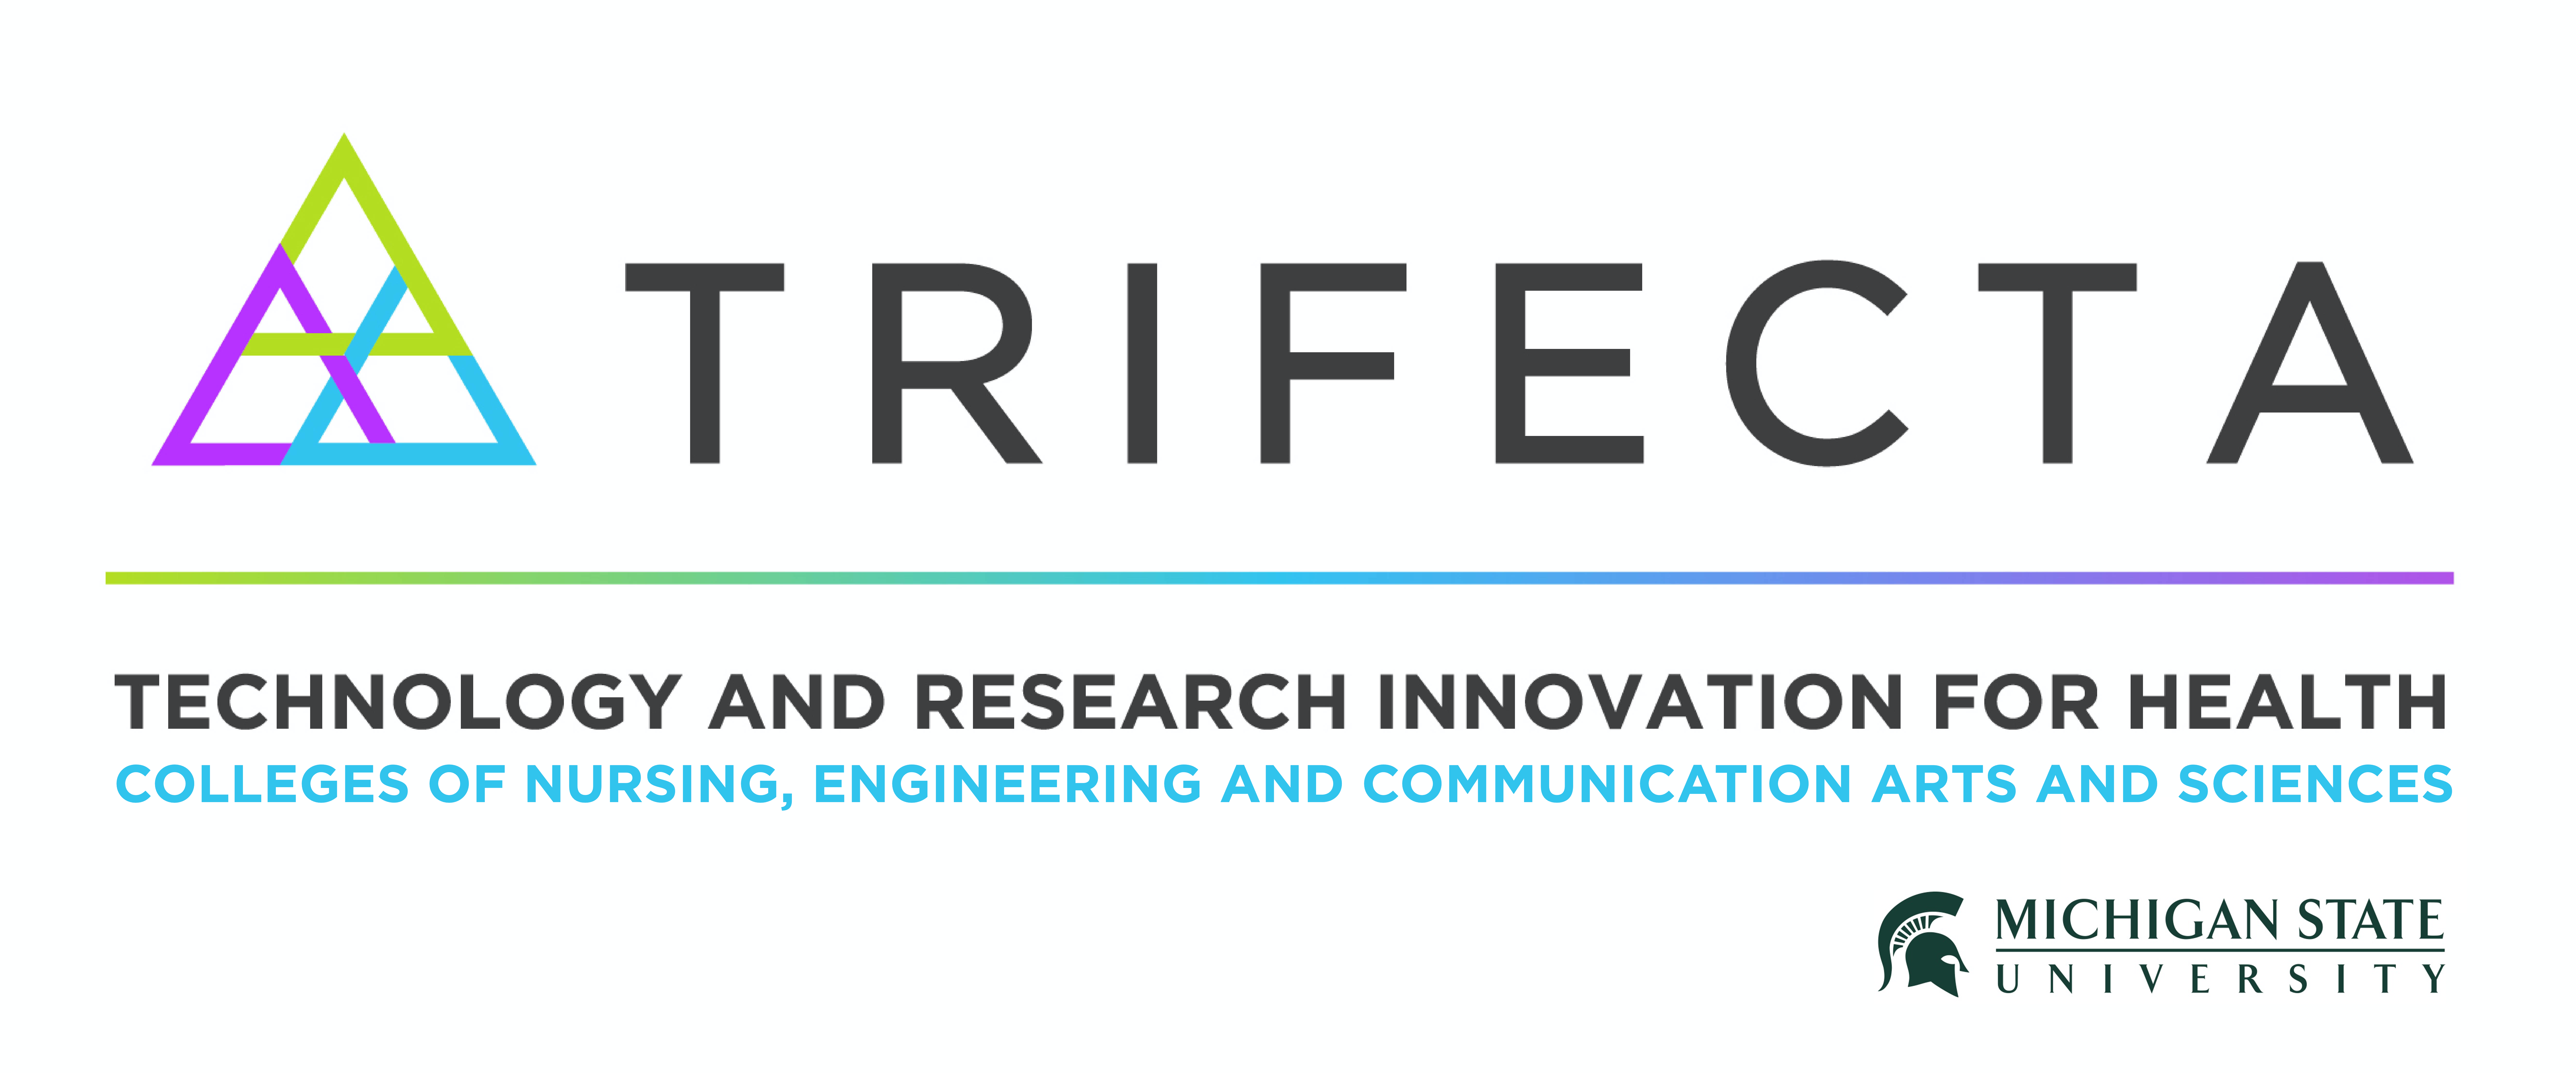 Trifecta: Technology and Research Innovation for Health. Colleges of Nursing, Engineering, and Communication Arts and Sciences, Michigan State University